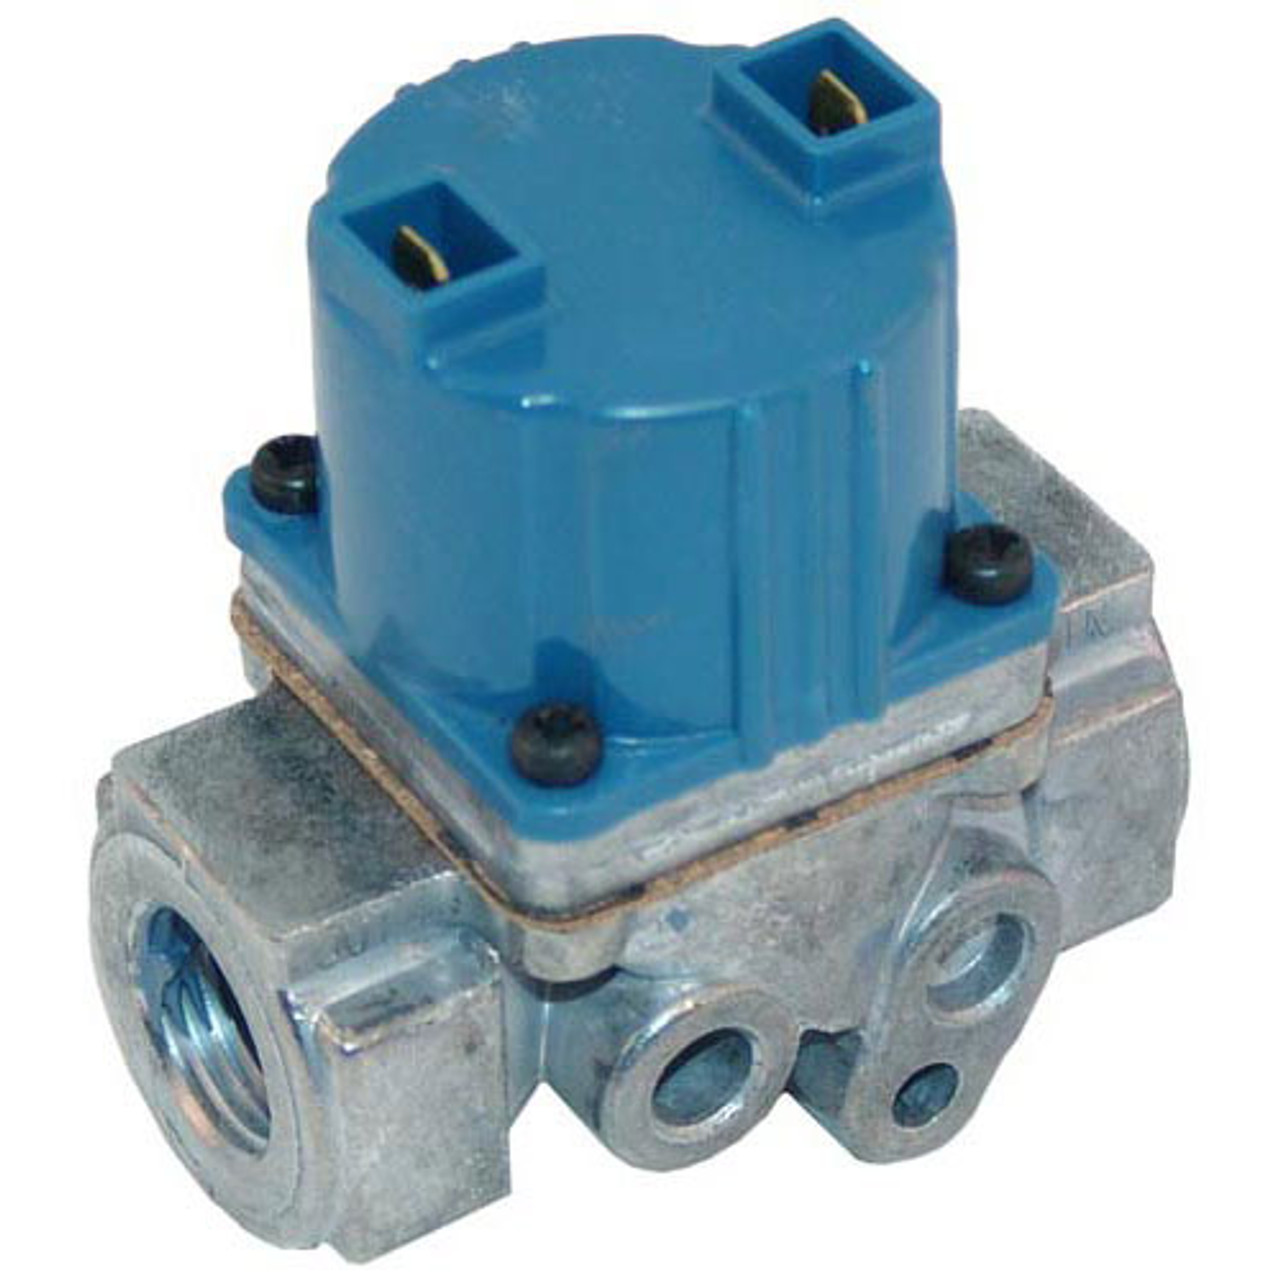 Solenoid Valve - Replacement Part For Imperial 33885